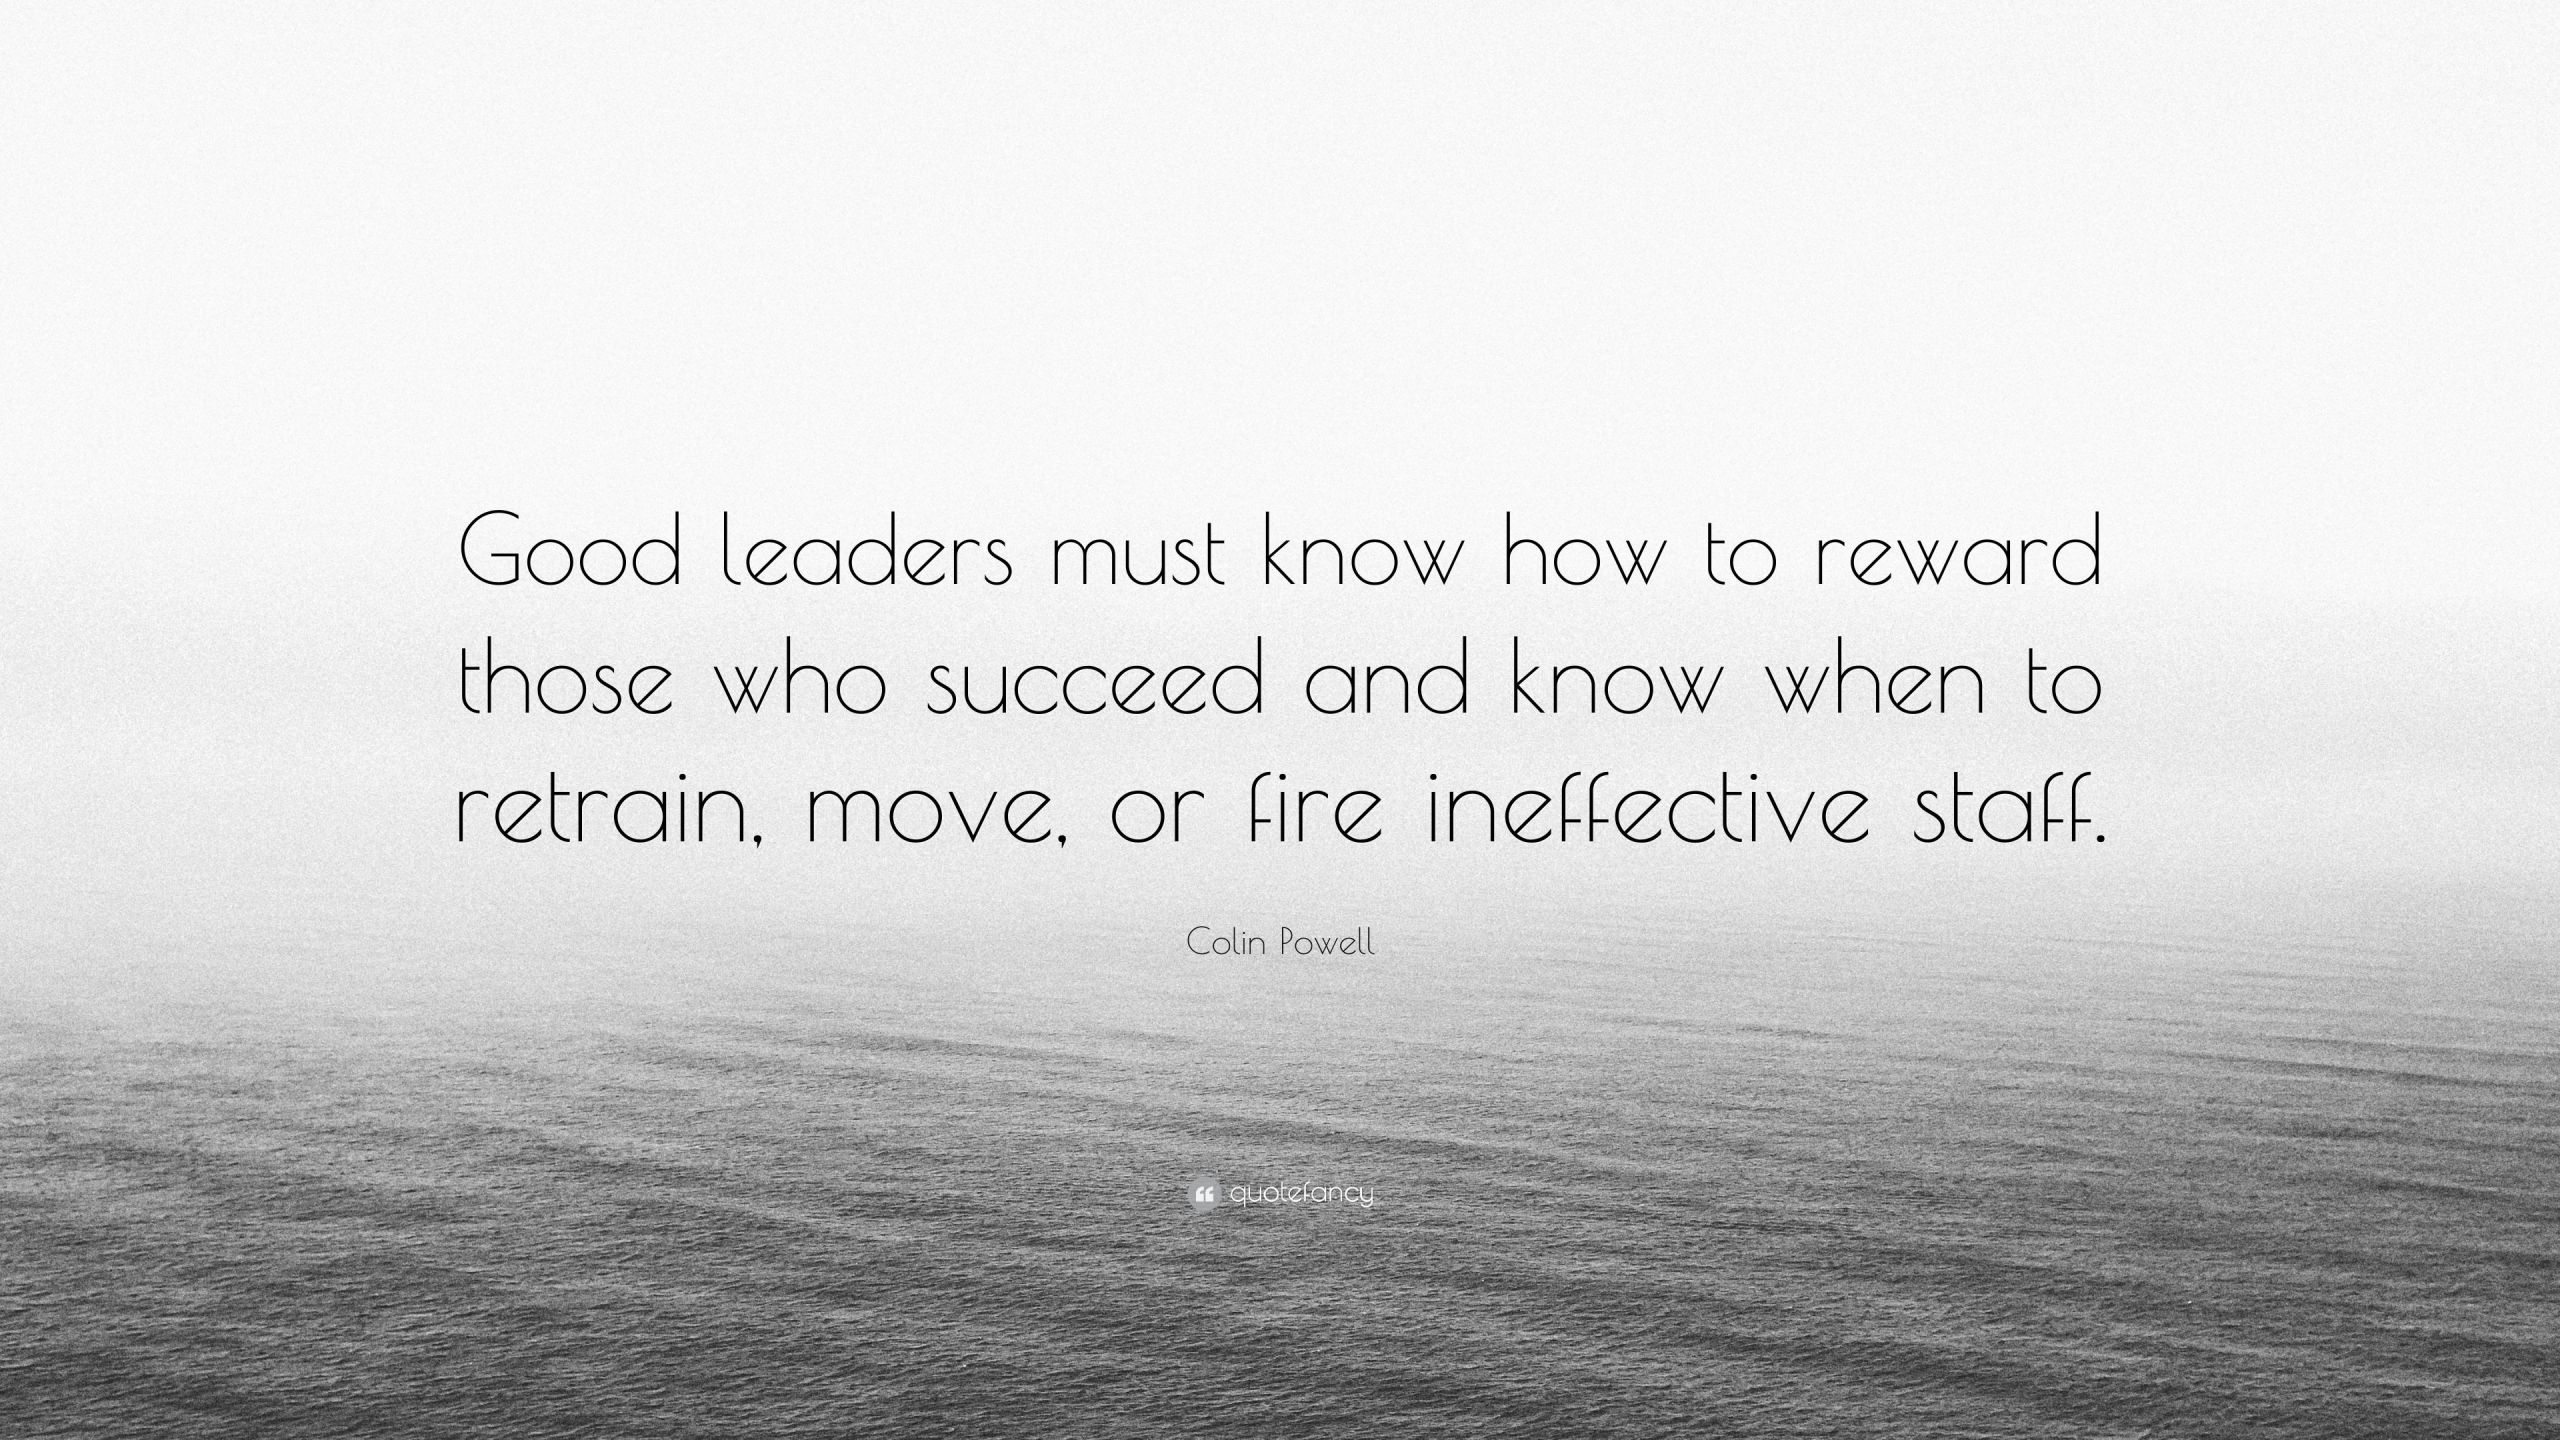 Colin Powell Quote Leadership
 Colin Powell Quote “Good leaders must know how to reward